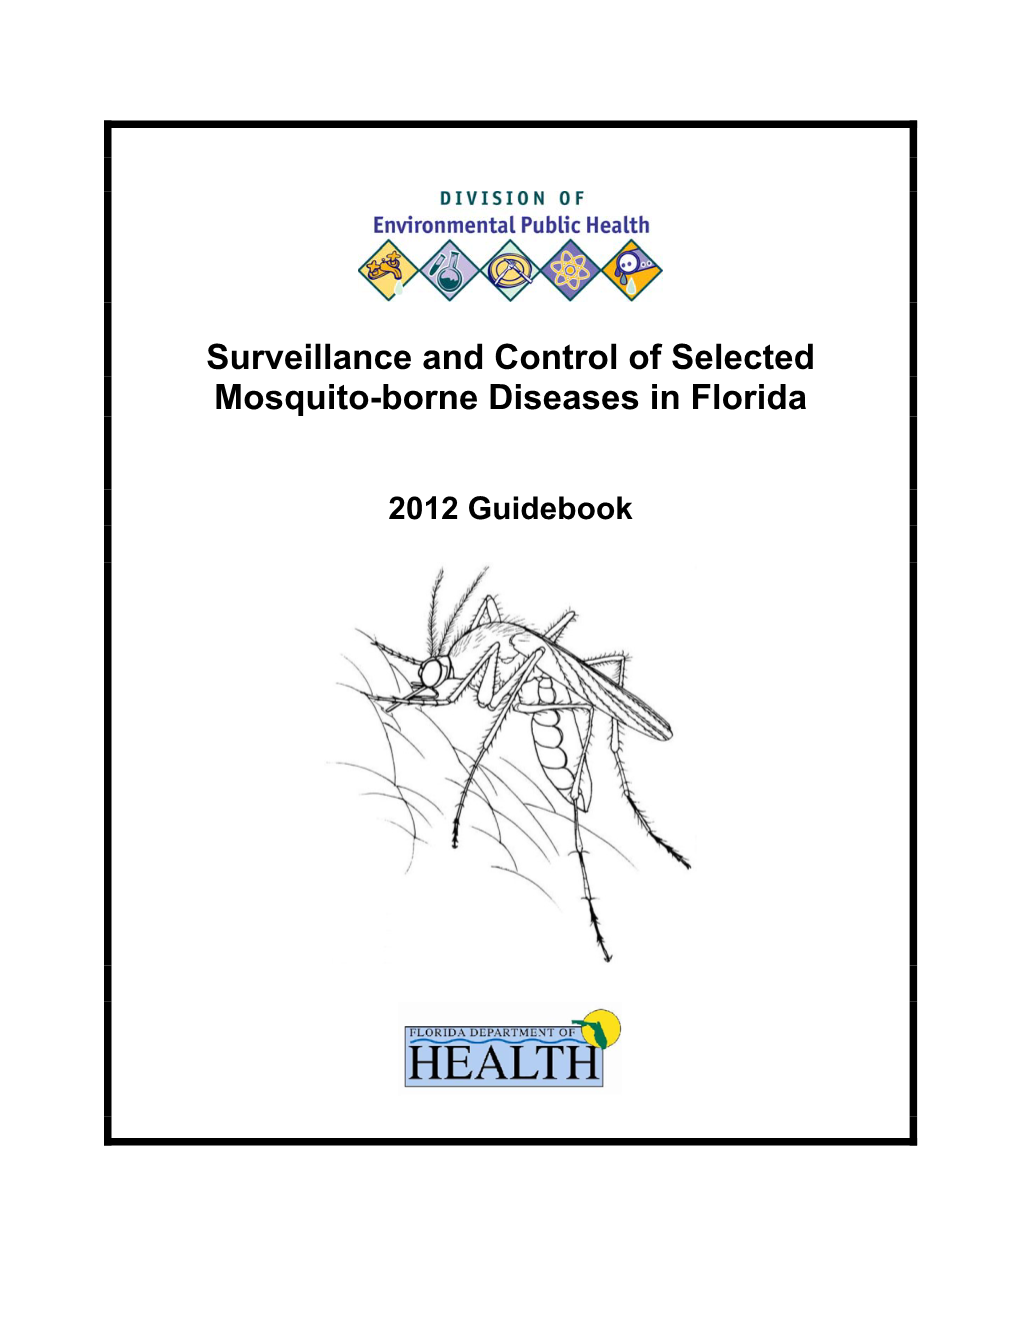 Surveillance and Control of Selected Mosquito-Borne Diseases in Florida